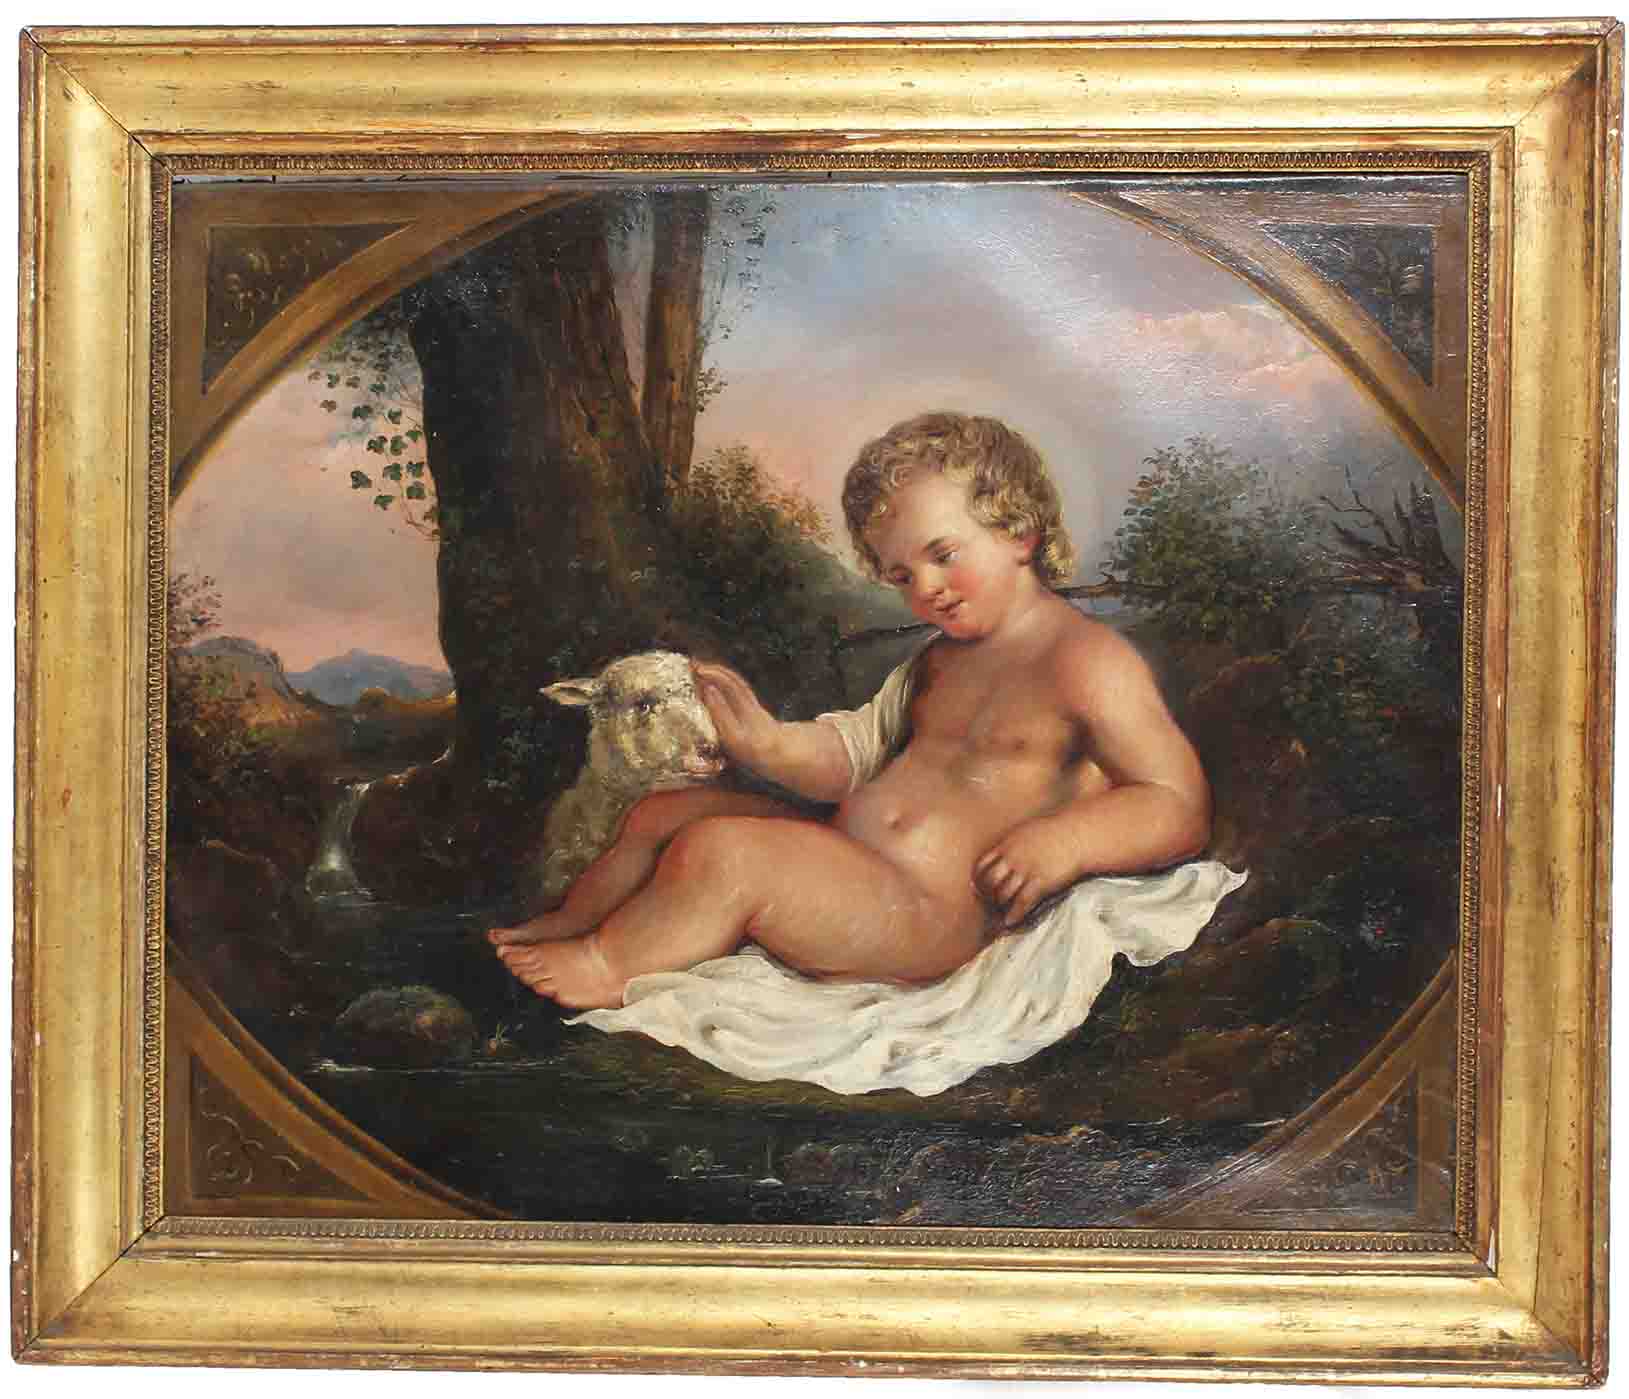 18th-19th Century European Old Master of Child with Lamb